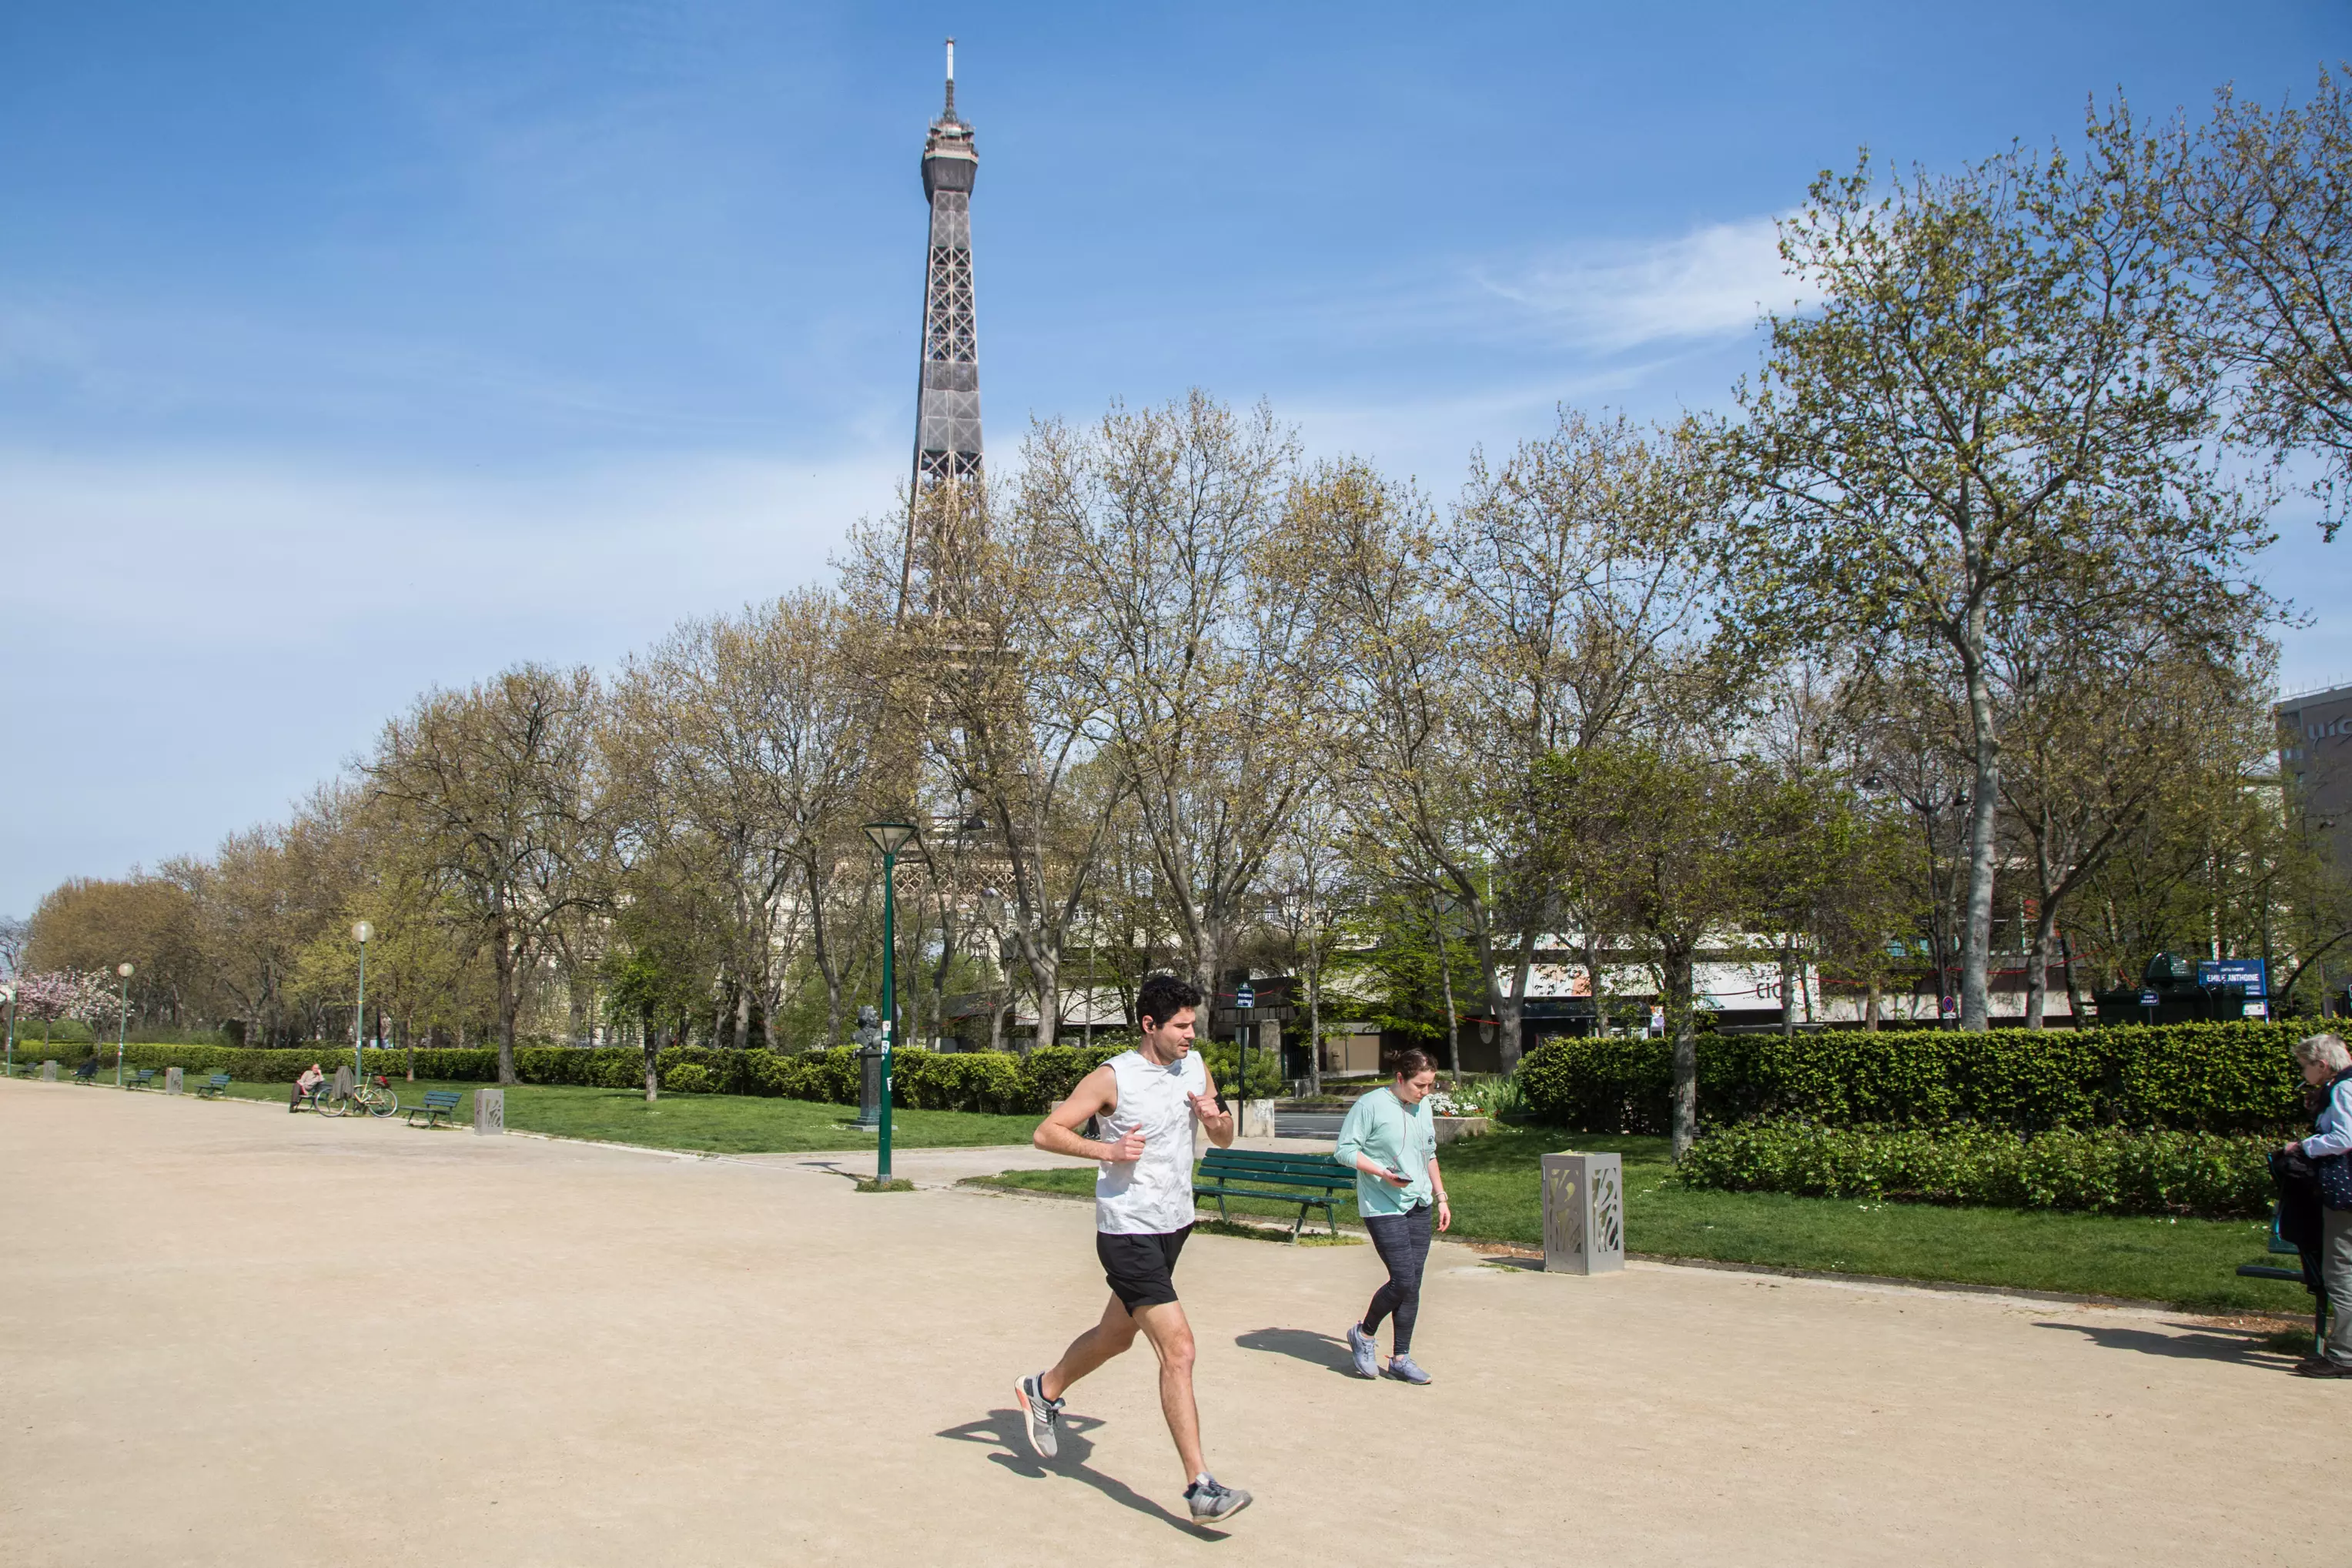 Daytime exercise has been banned in Paris to help fight the spread of coronavirus.